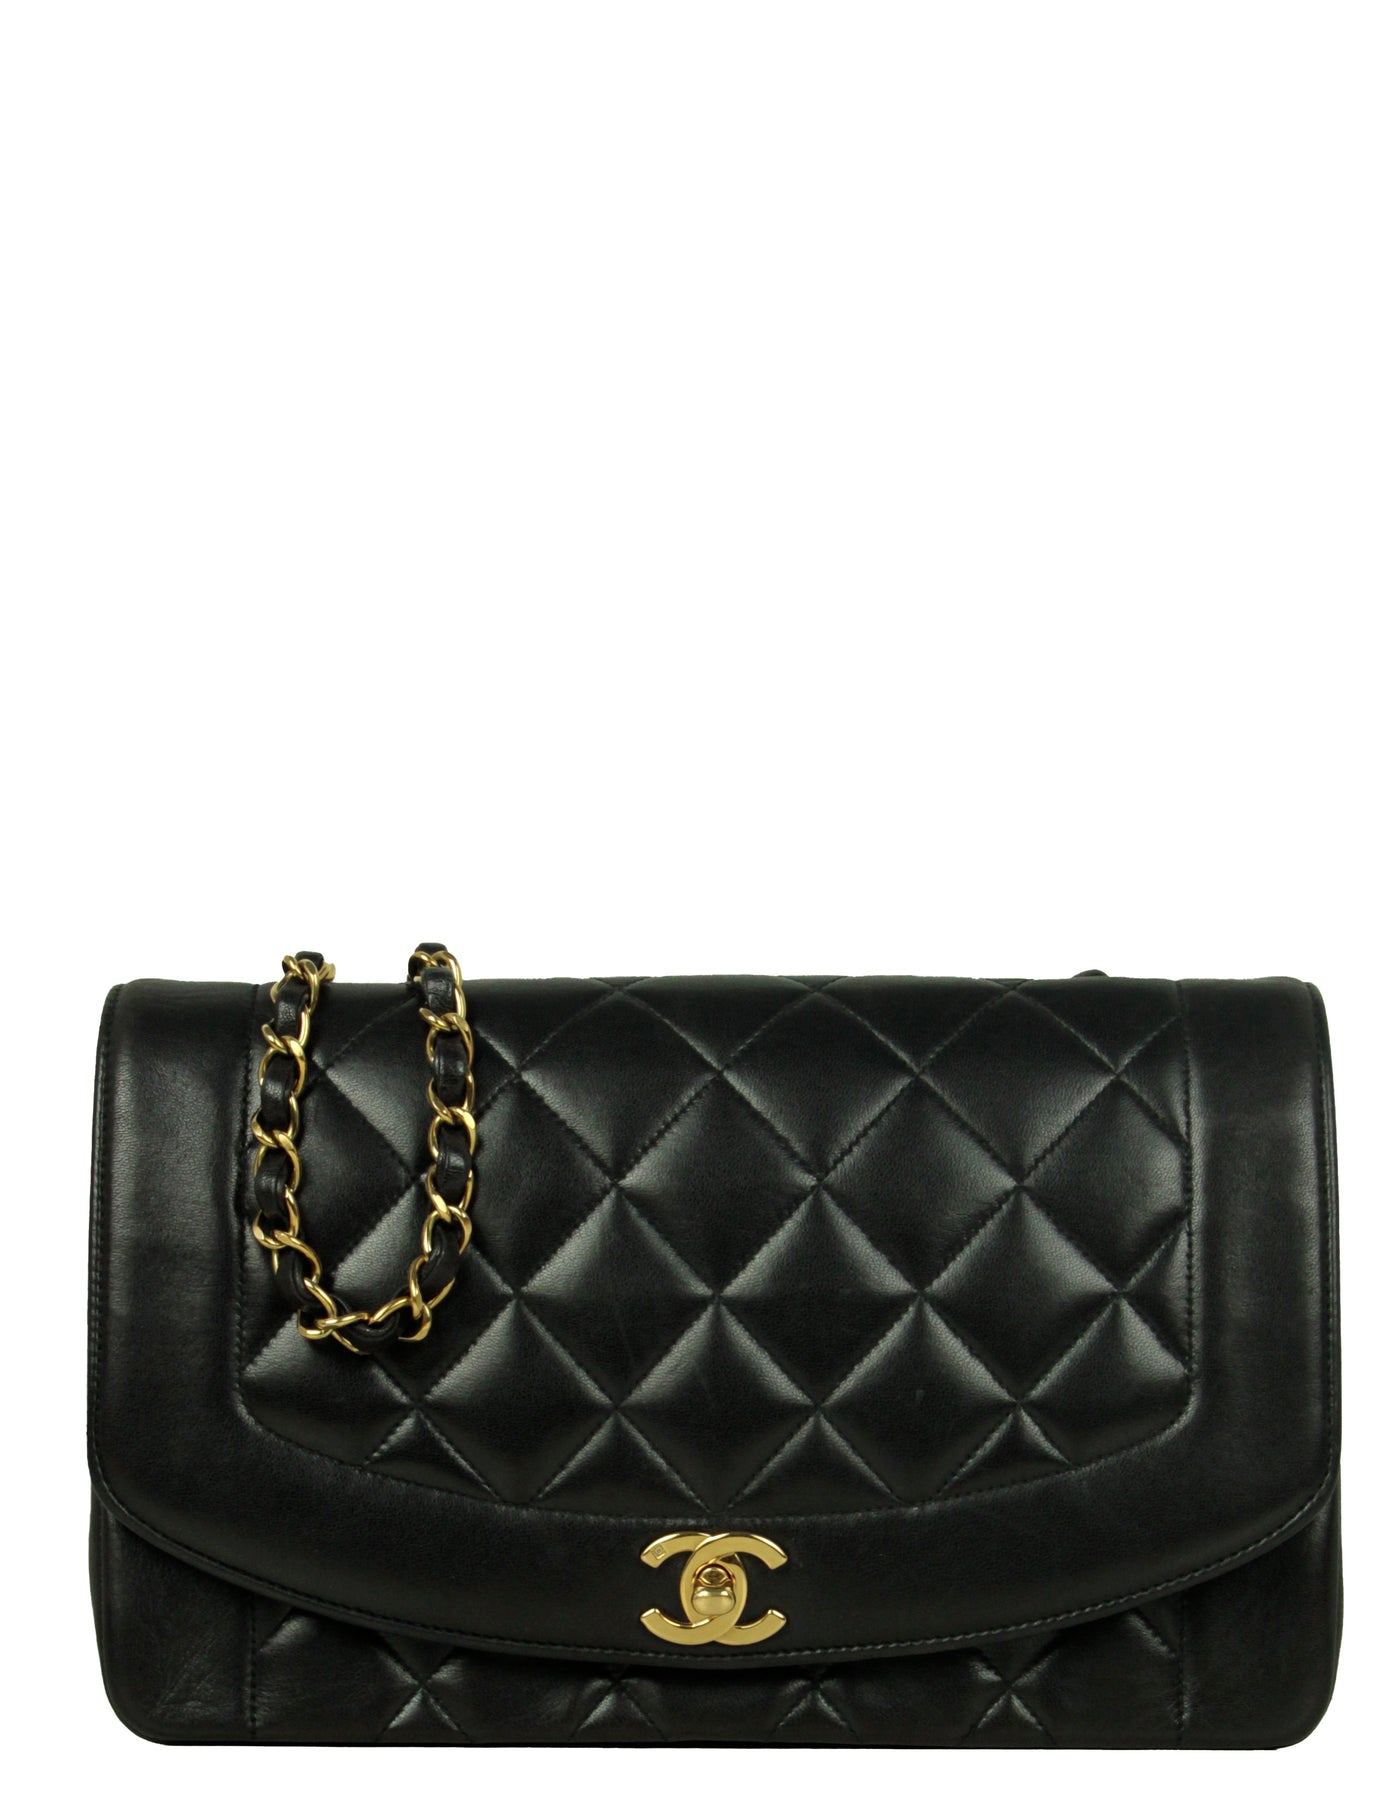 Chanel Medium Logo Gold Enchained Calfskin Quilted Black Leather Flap Bag